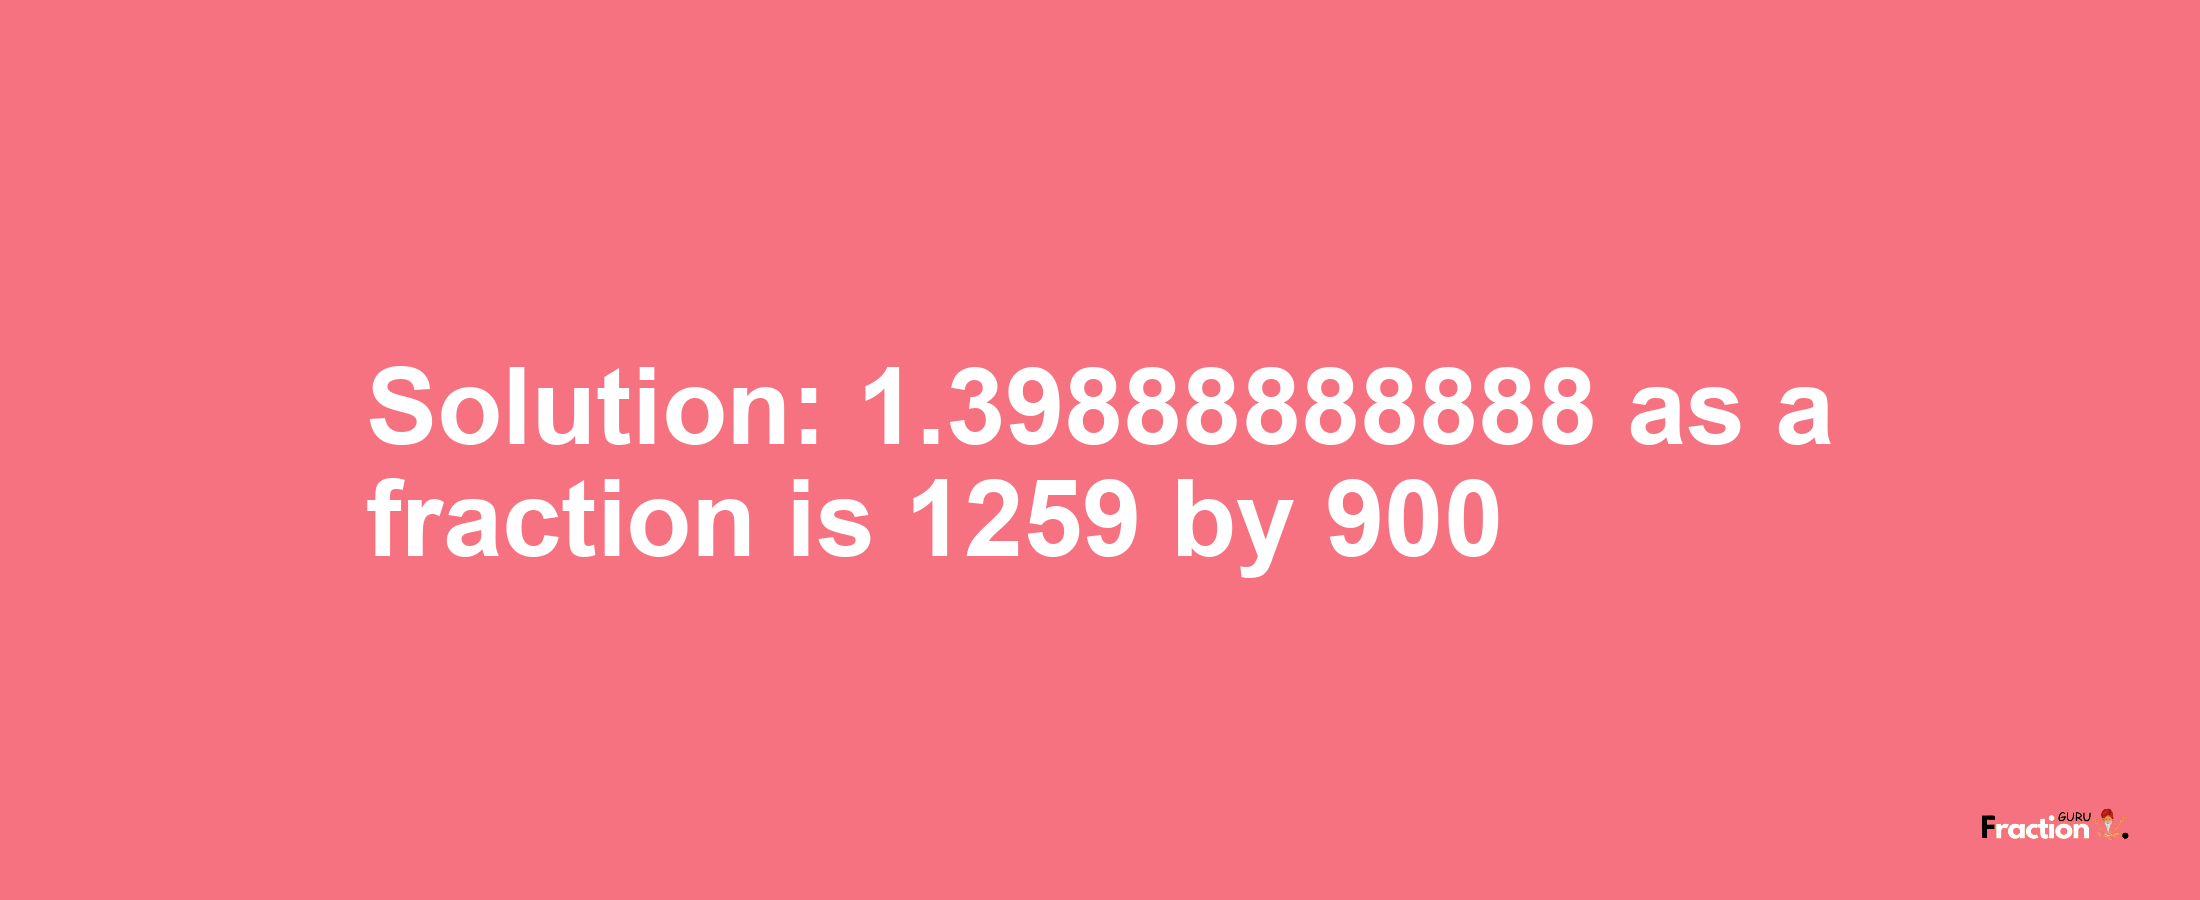 Solution:1.39888888888 as a fraction is 1259/900